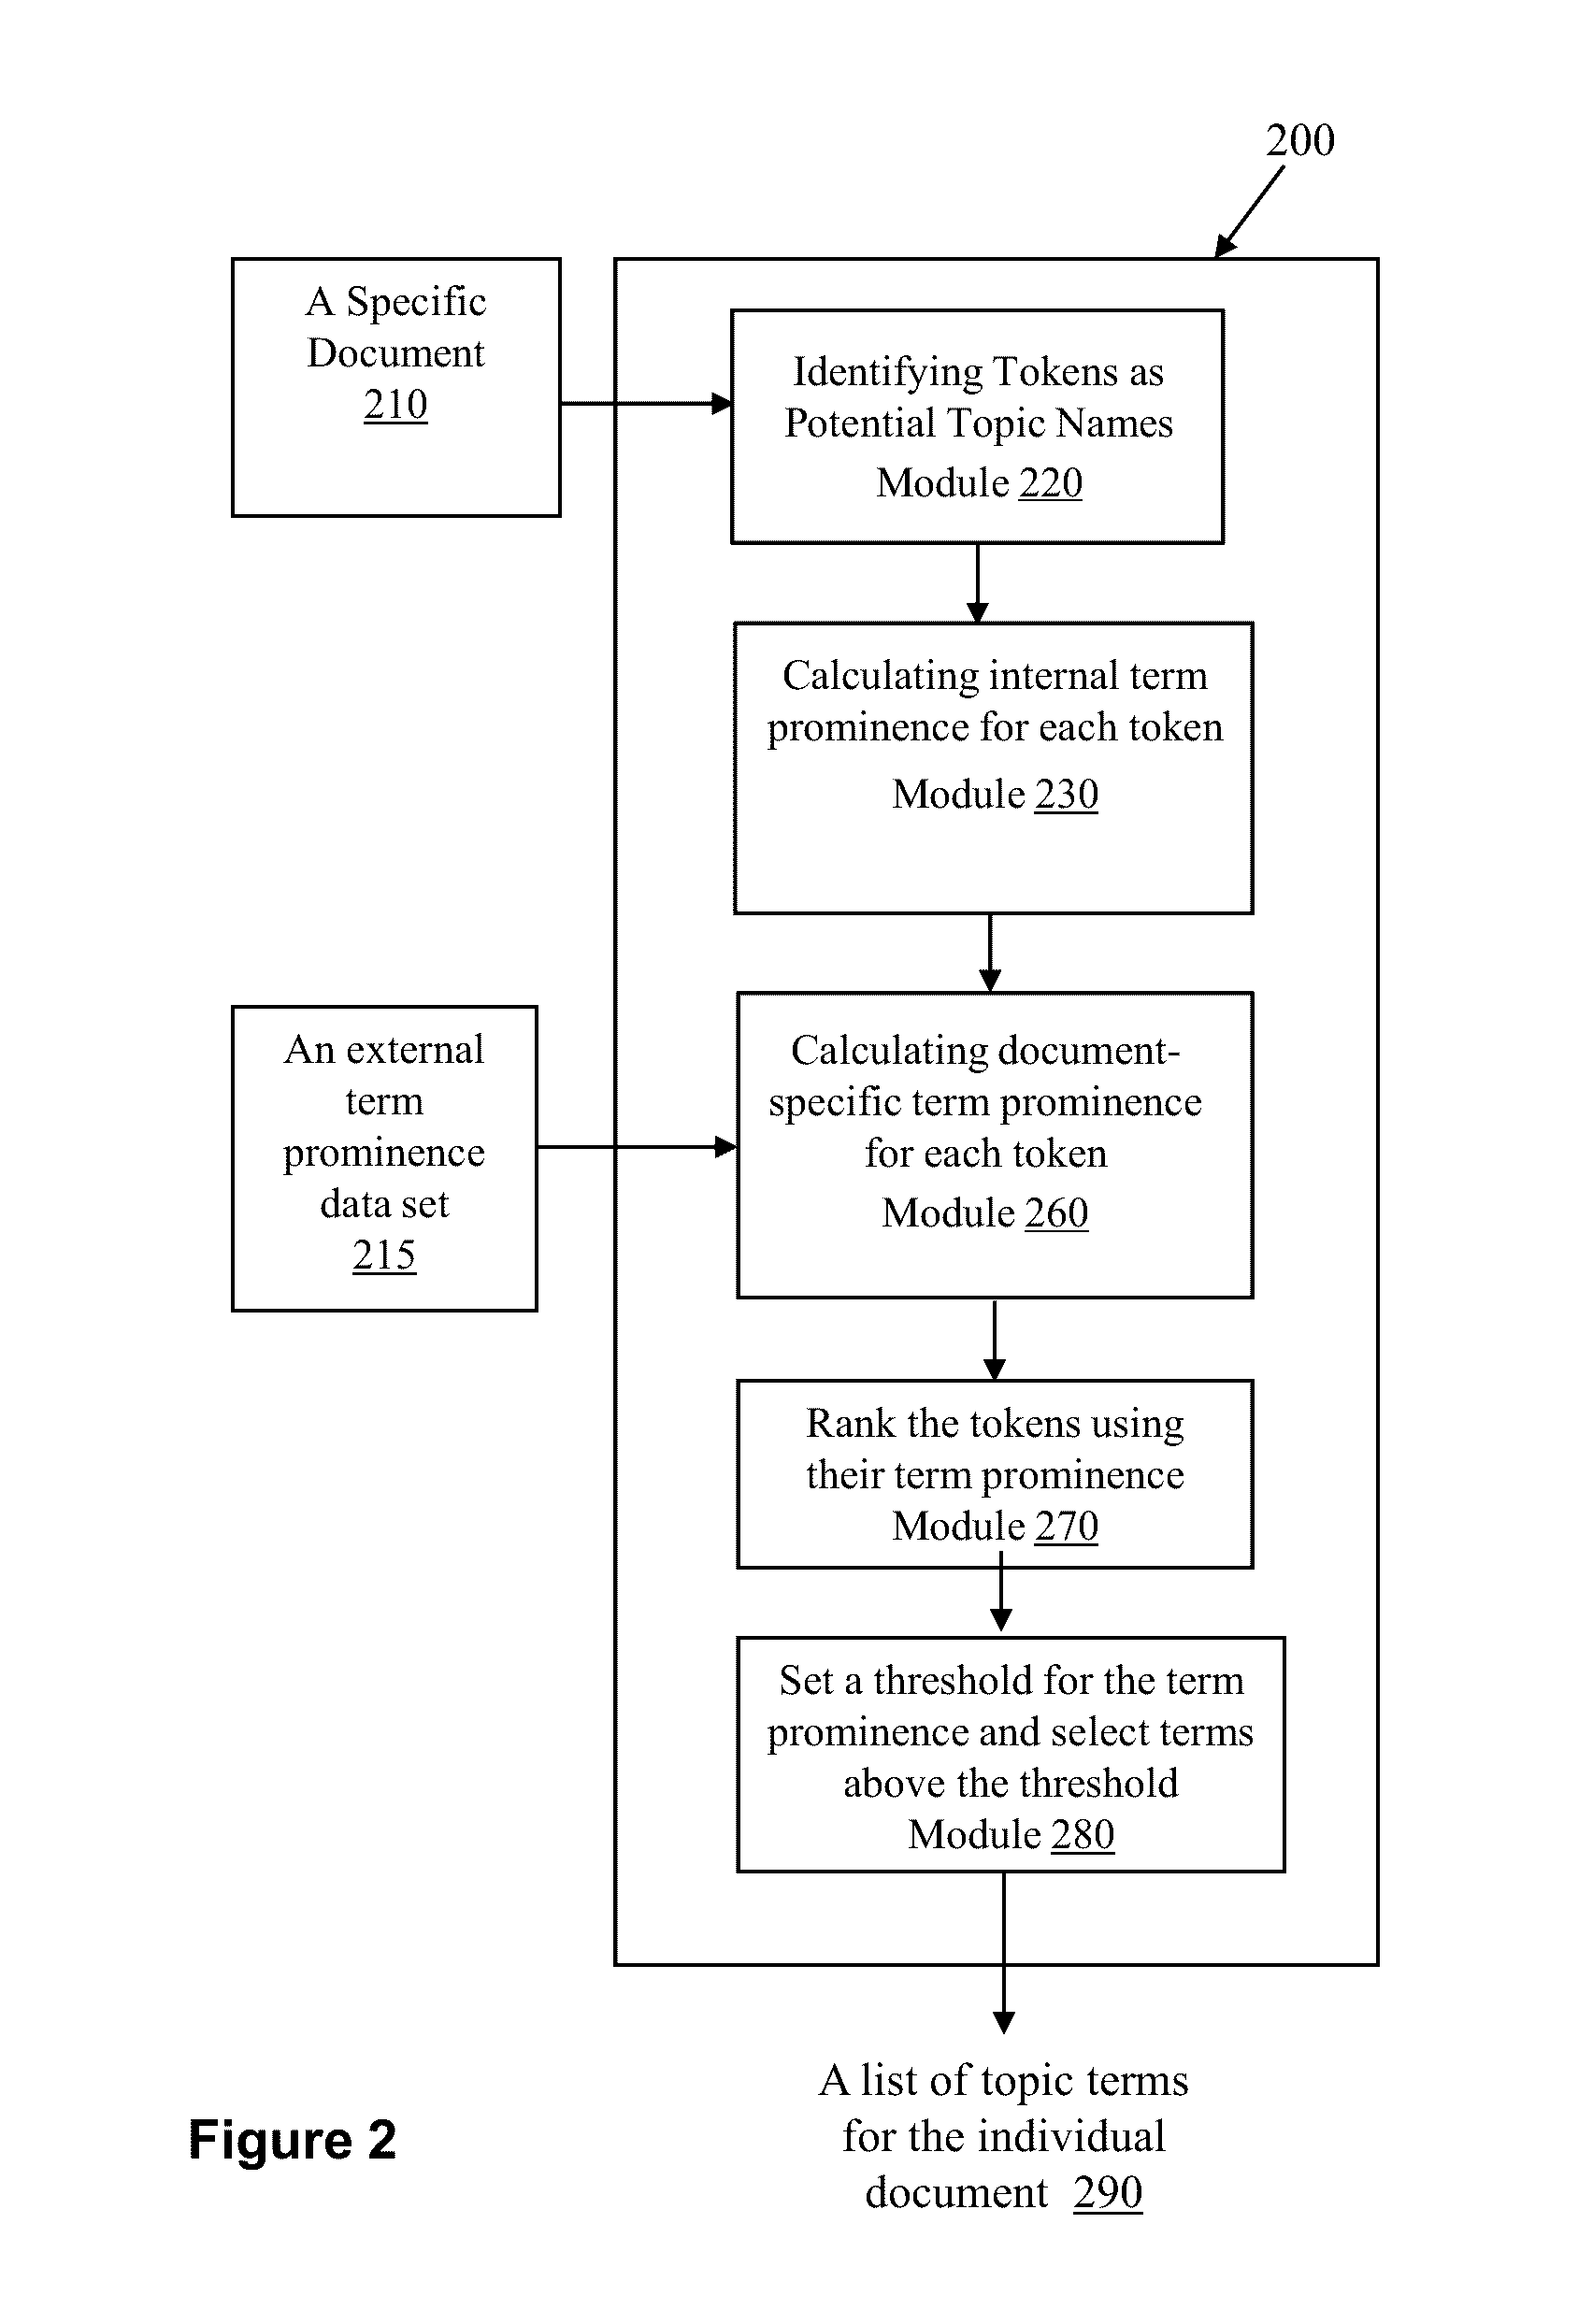 Text processing system and methods for automated topic discovery, content tagging, categorization, and search